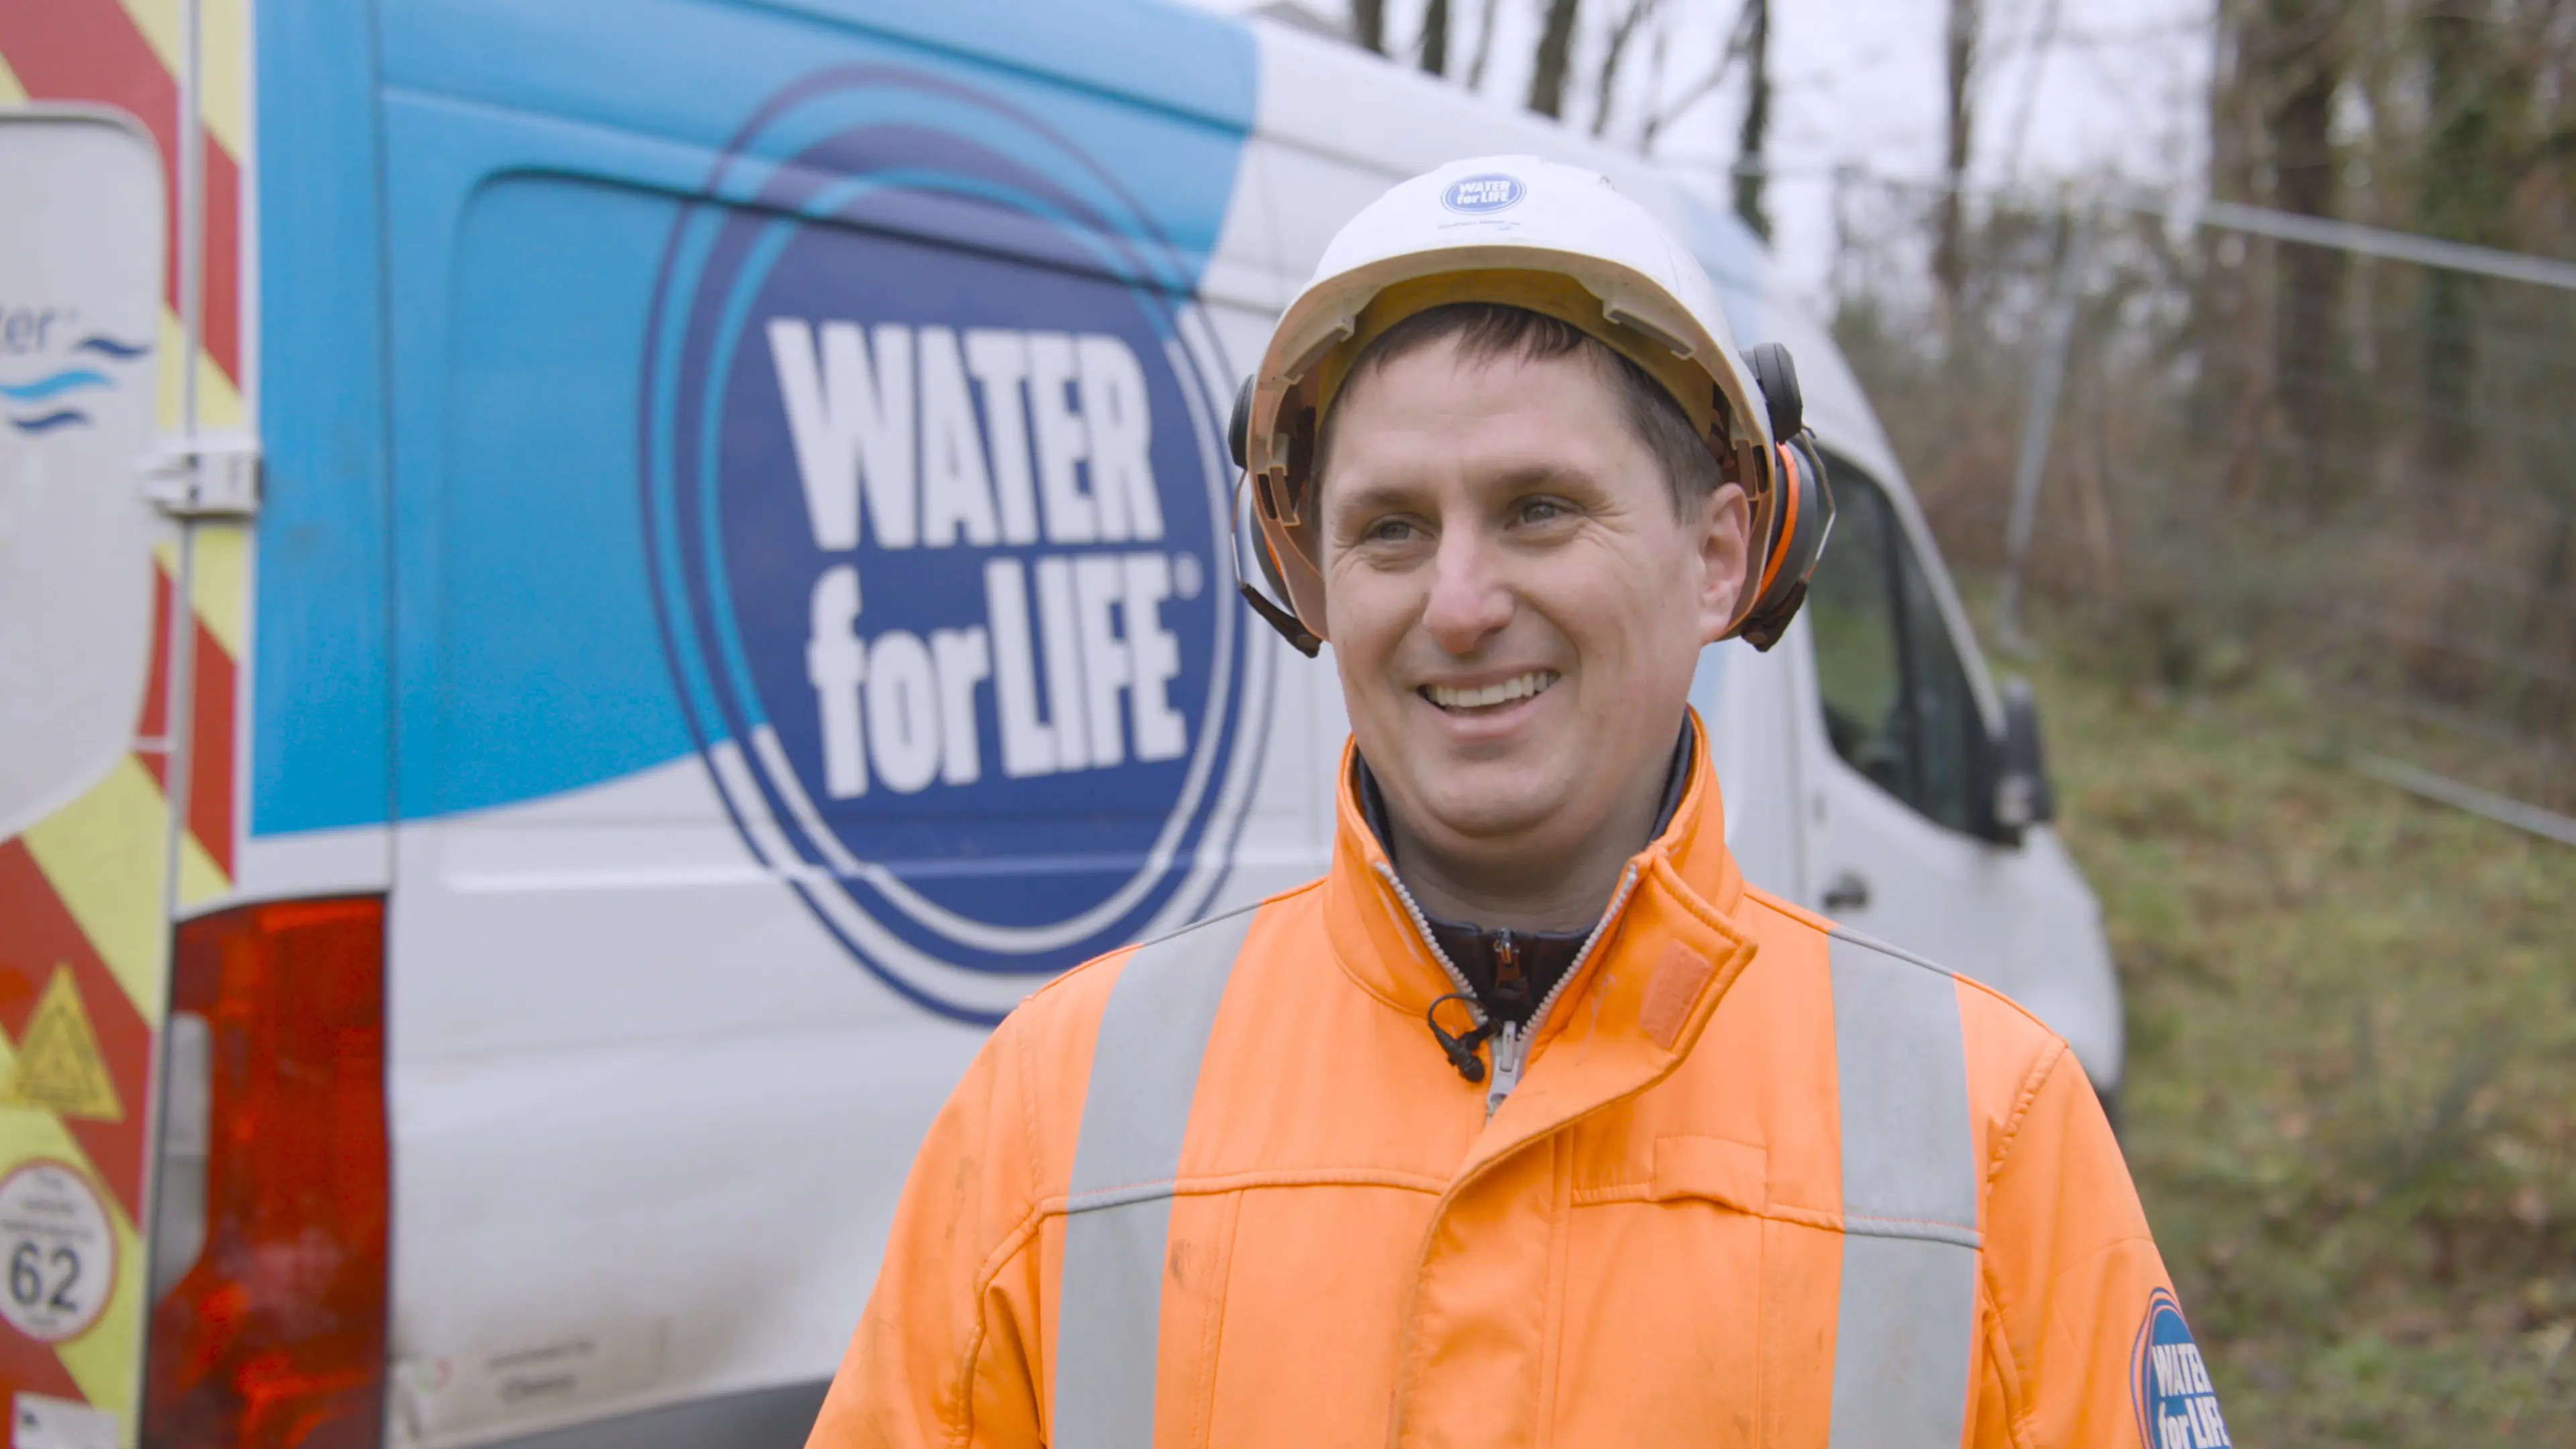 Water Network Inspector at Southern Water 